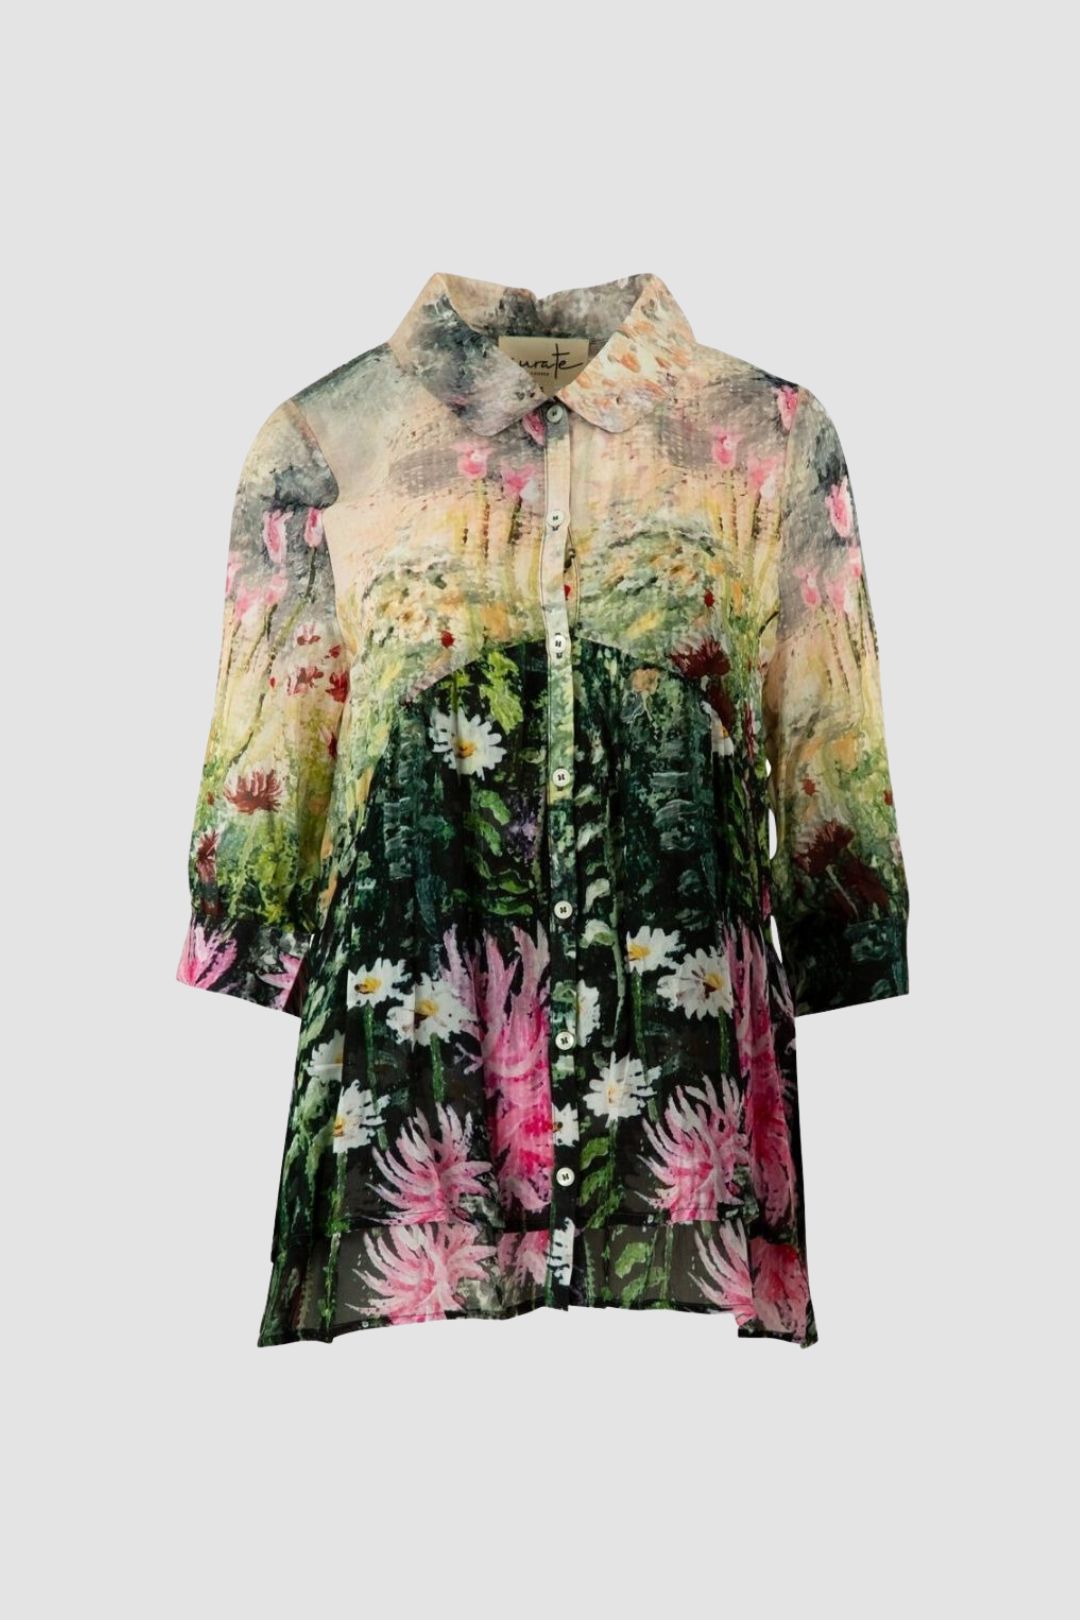 Curate By Trelise Cooper - The Shape Of New Devine Dreams Shirt in Floral Print